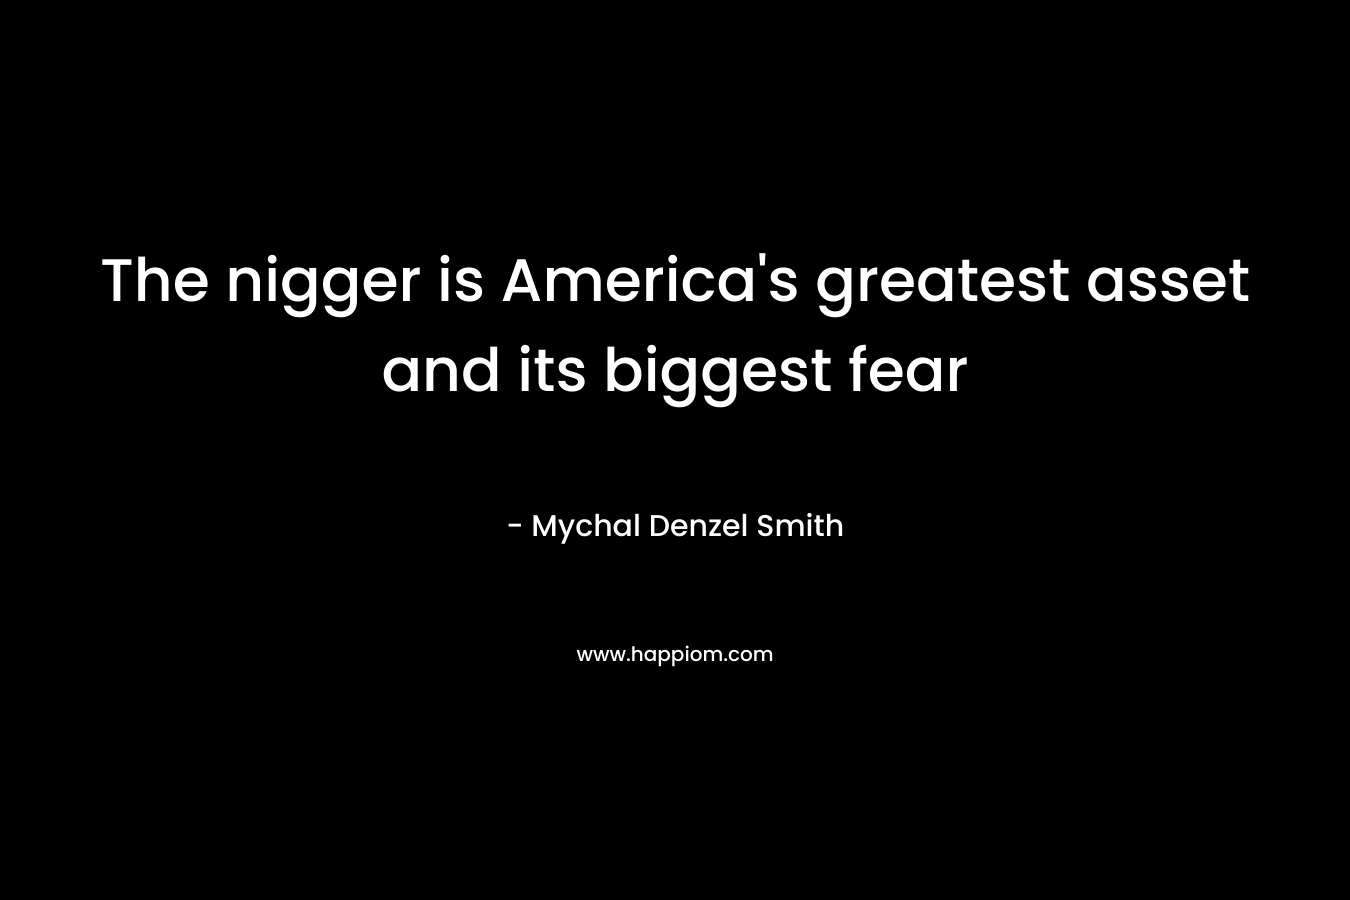 The nigger is America's greatest asset and its biggest fear